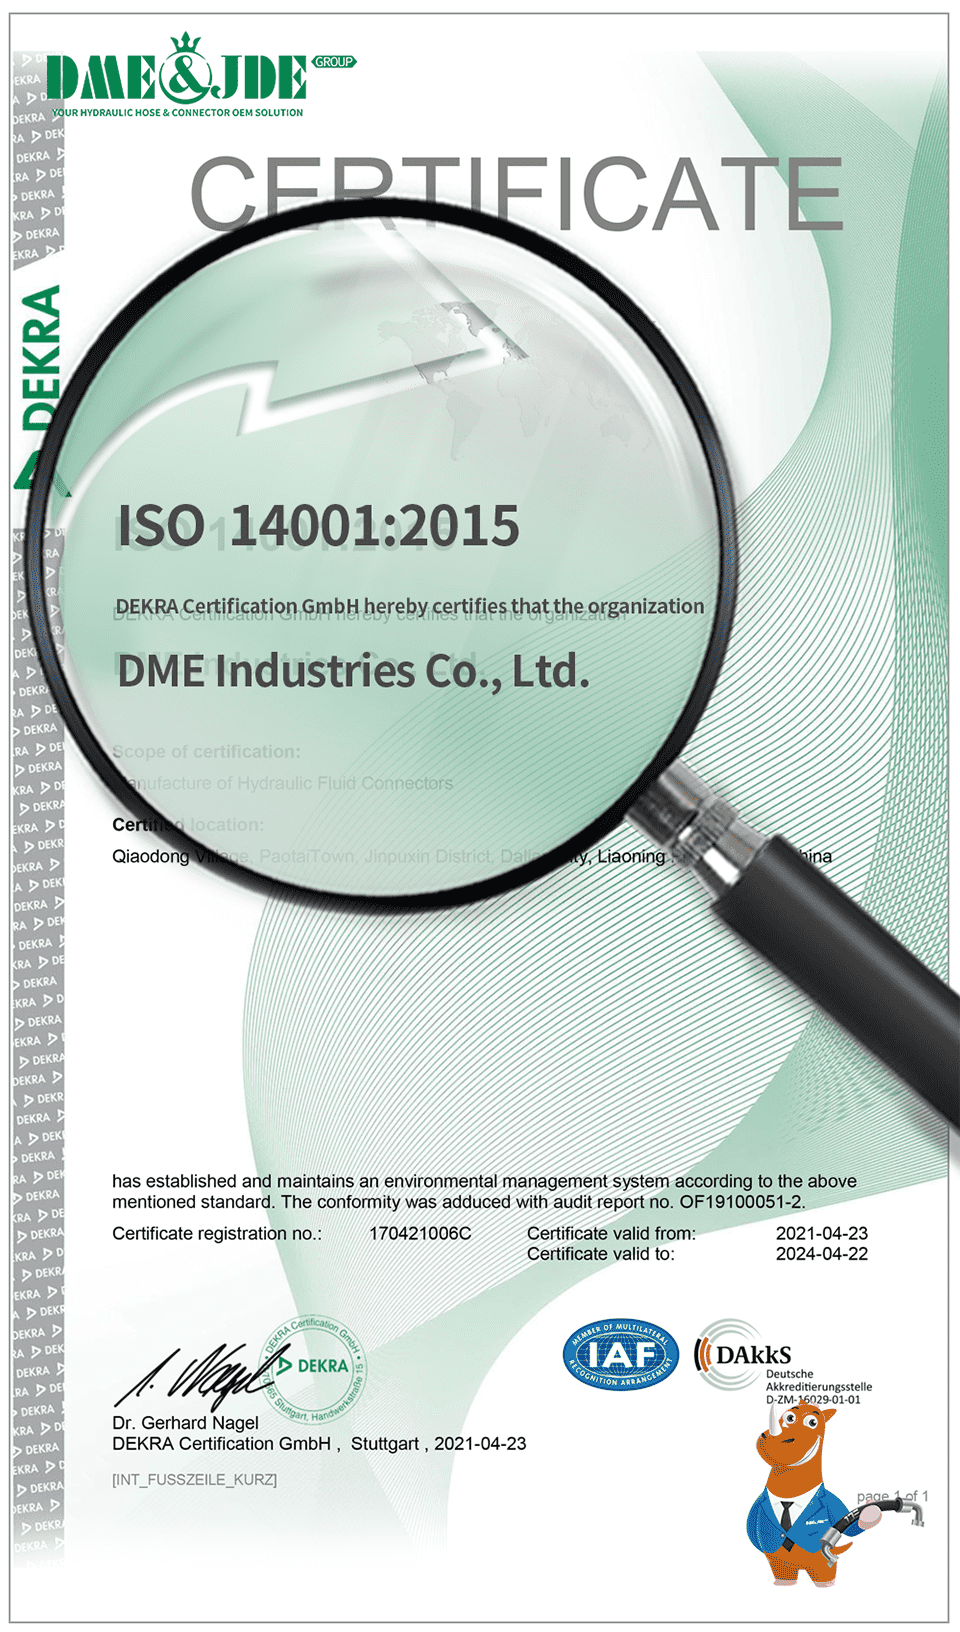 An ISO 14001 certification cover